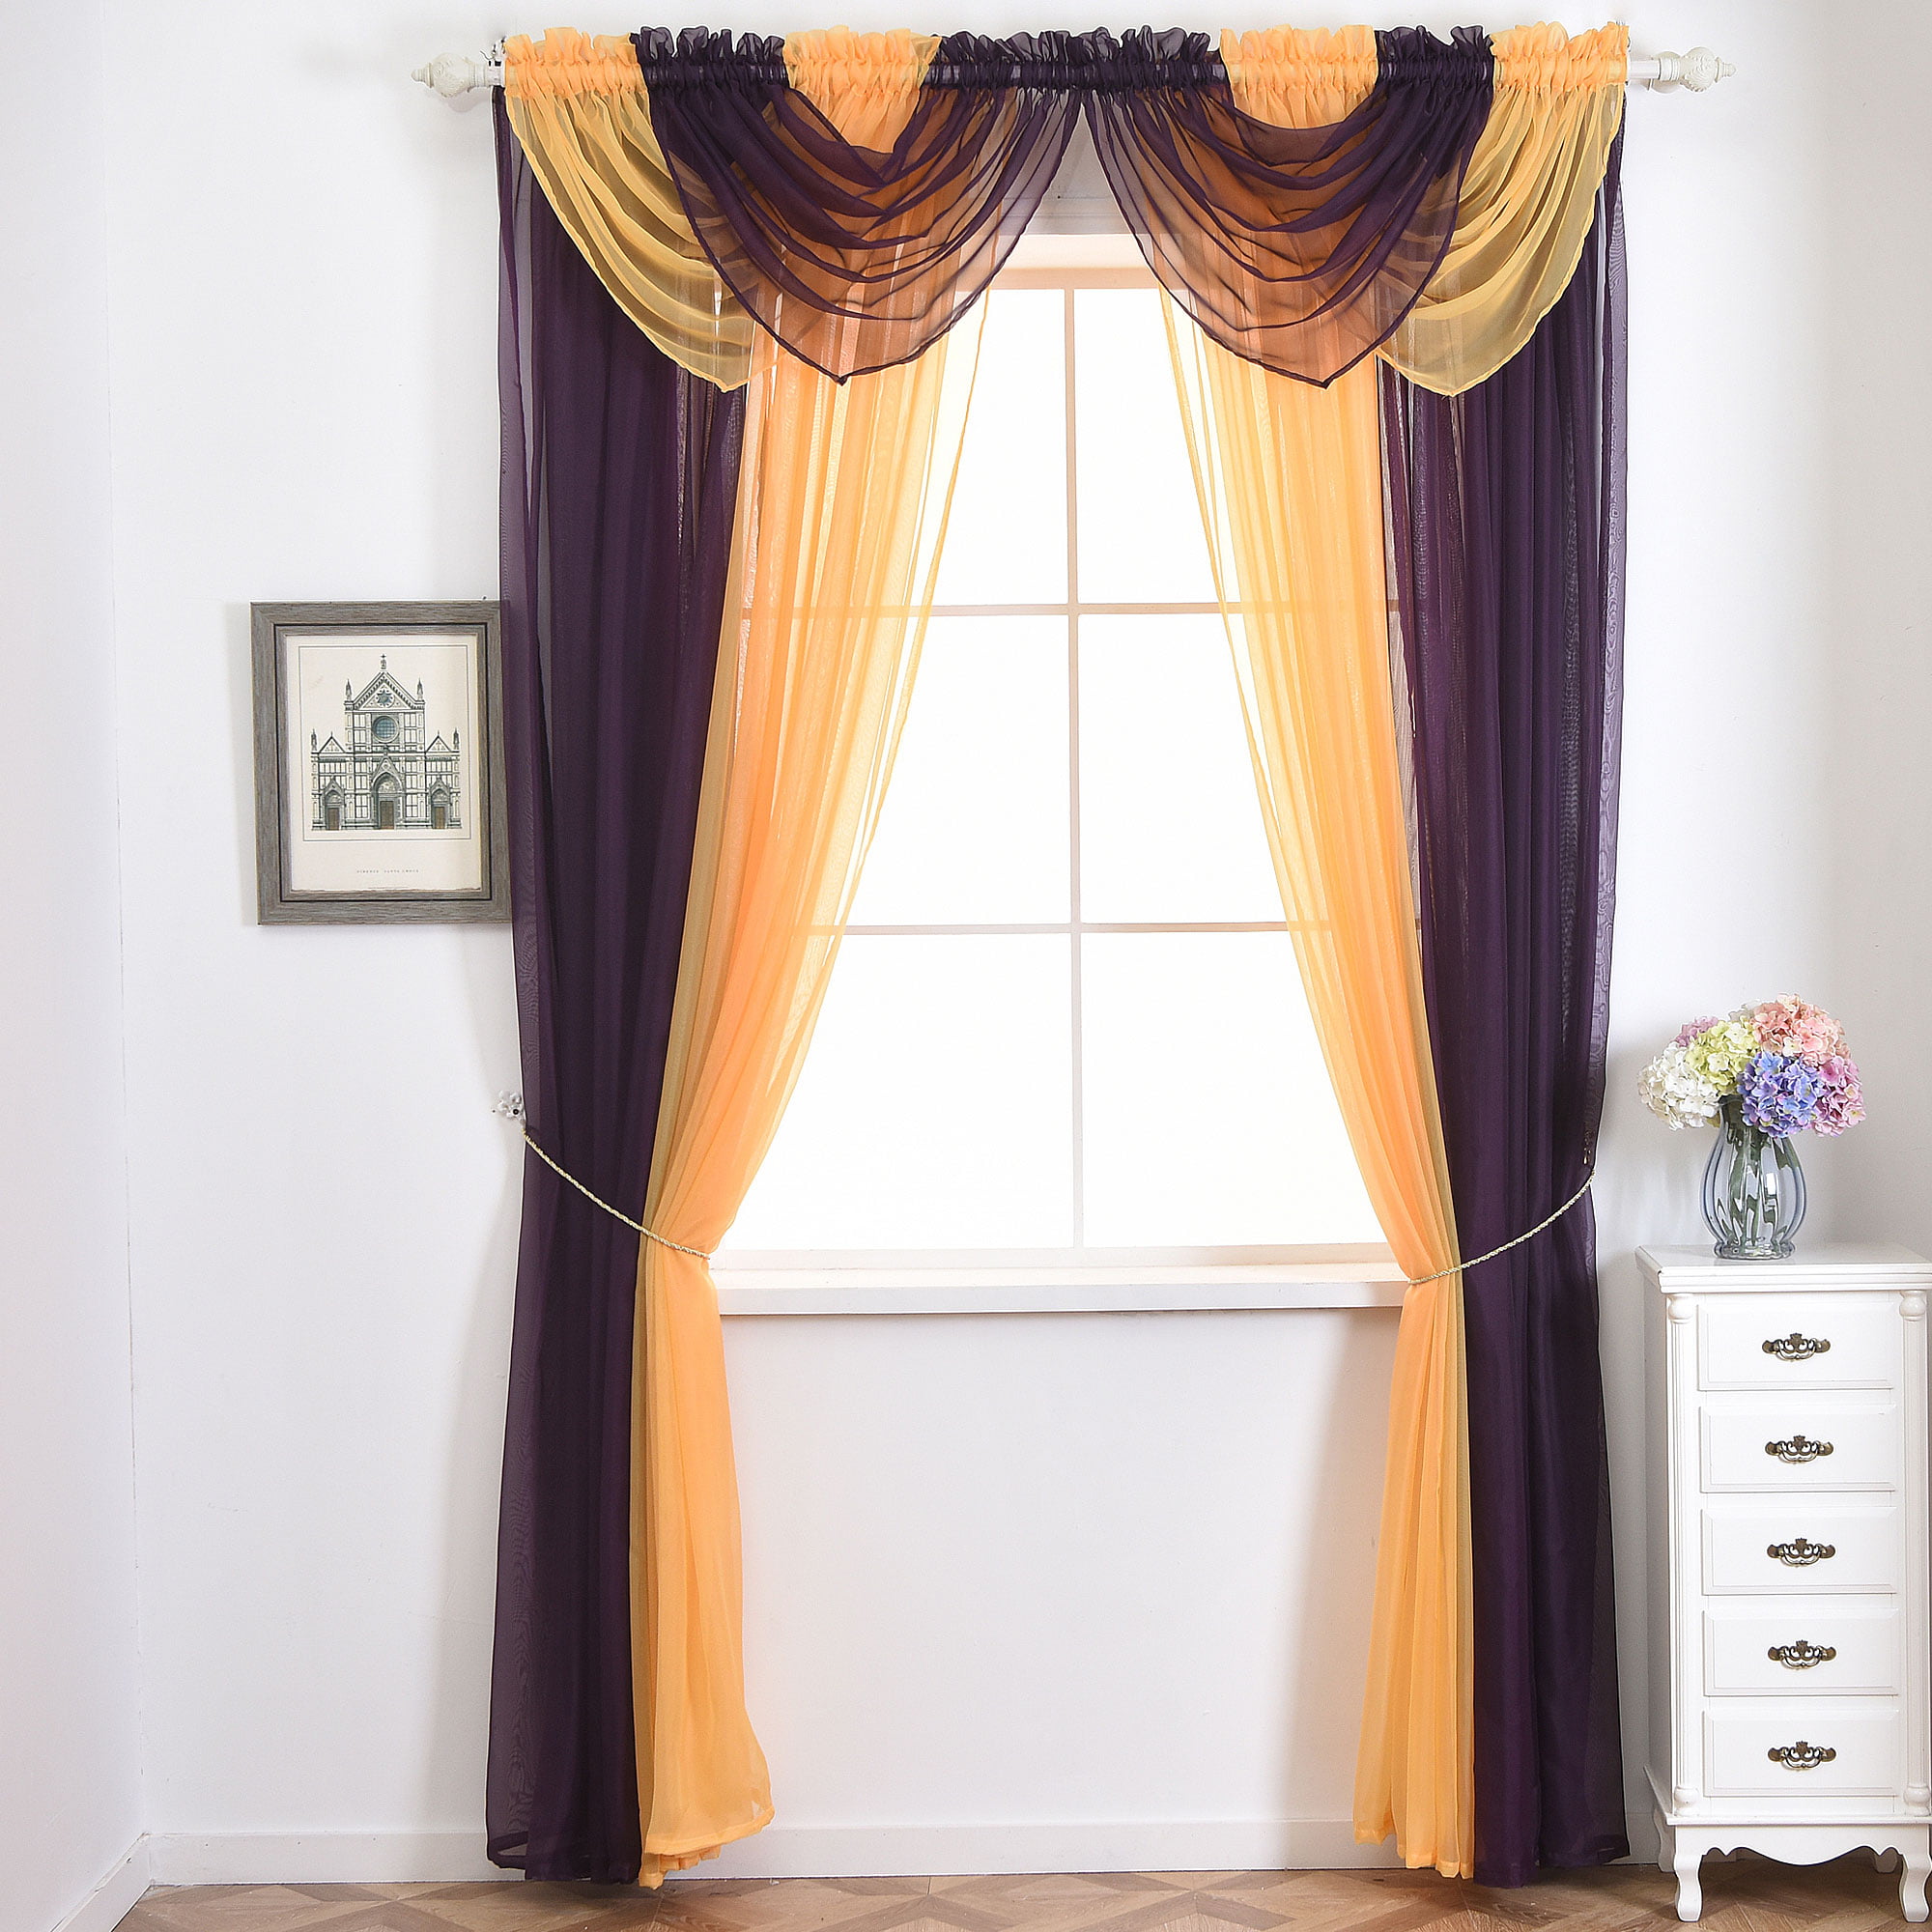 Sheer Voile Window Curtains/Drape/Panel/Scarf Assorted Solid Color Curtain Panel 